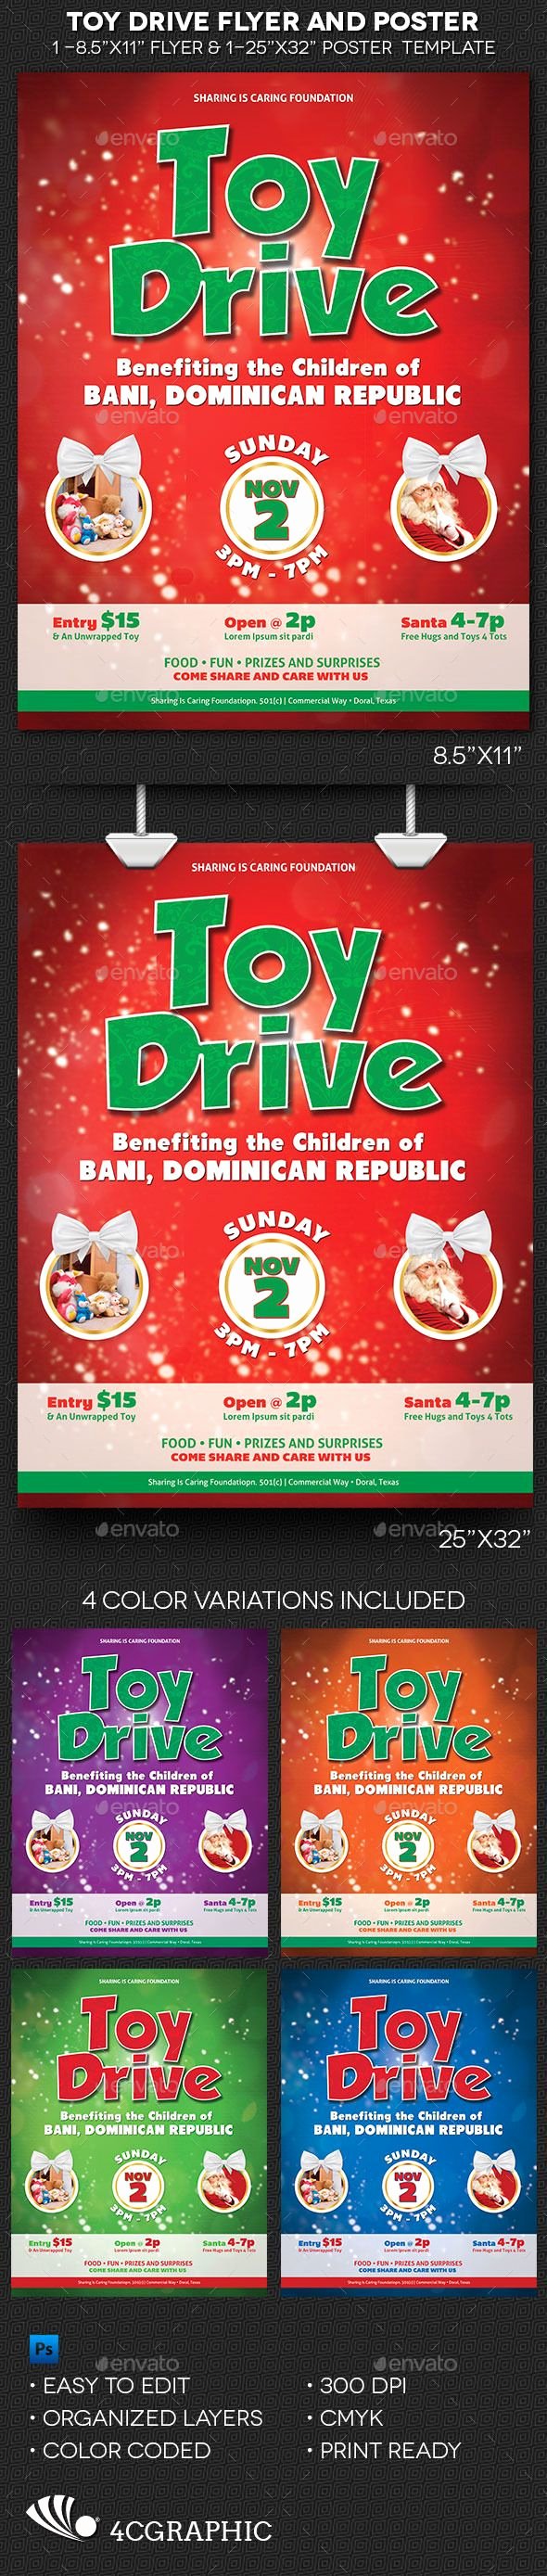 Toy Drive Flyer Template Inspirational toy Drive Flyer and Poster Template